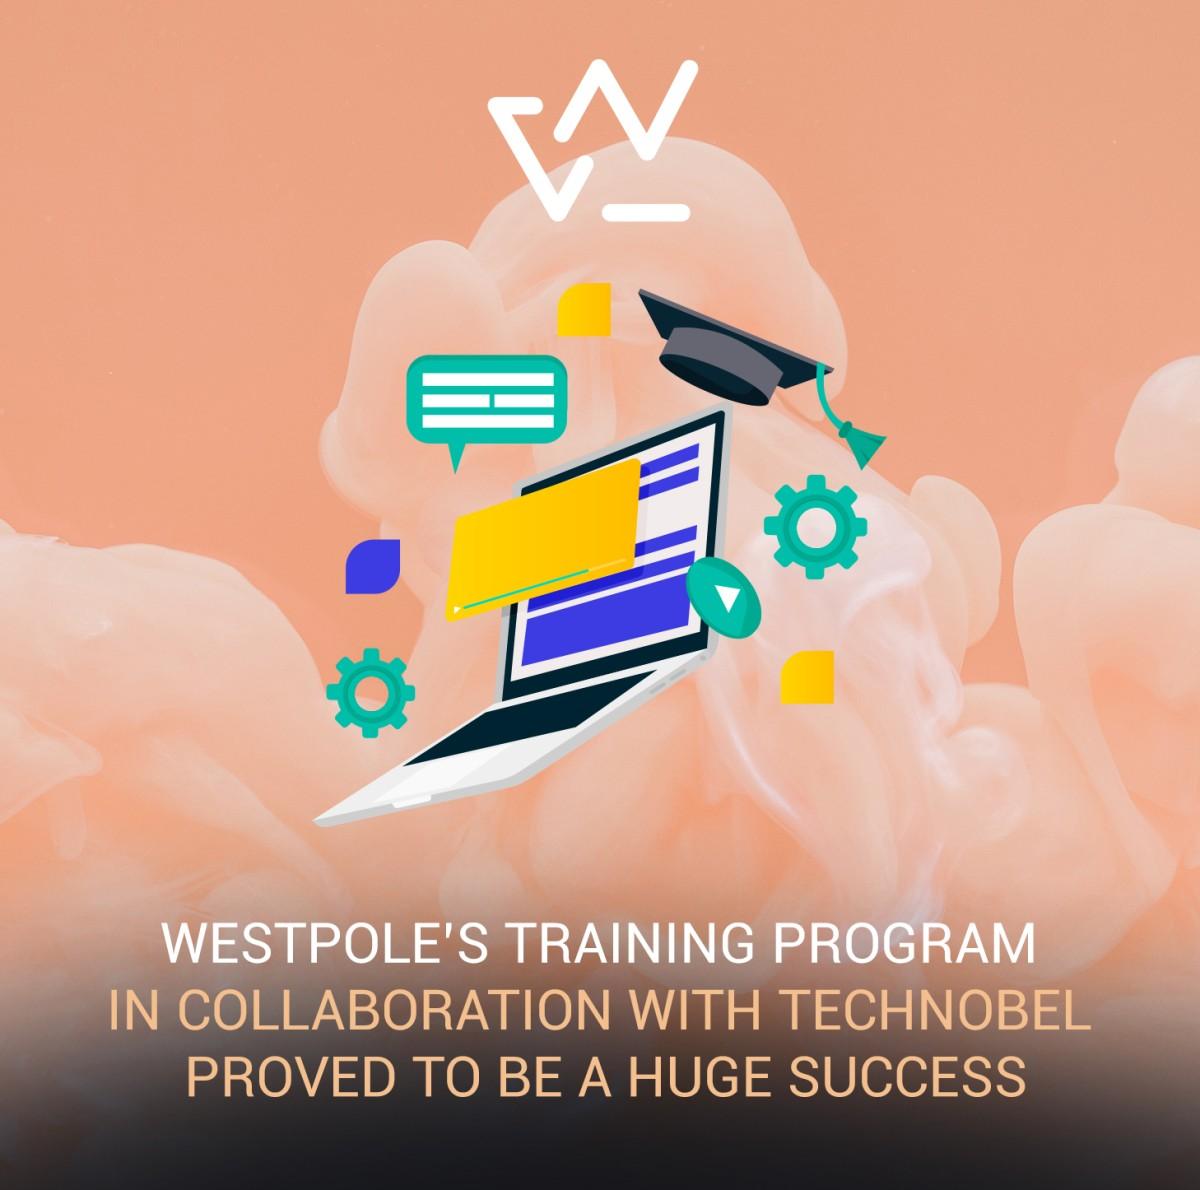 WESTPOLE’S TRAINING PROGRAM IN COLLABORATION WITH TECHNOBEL PROVED TO BE A HUGE SUCCESS